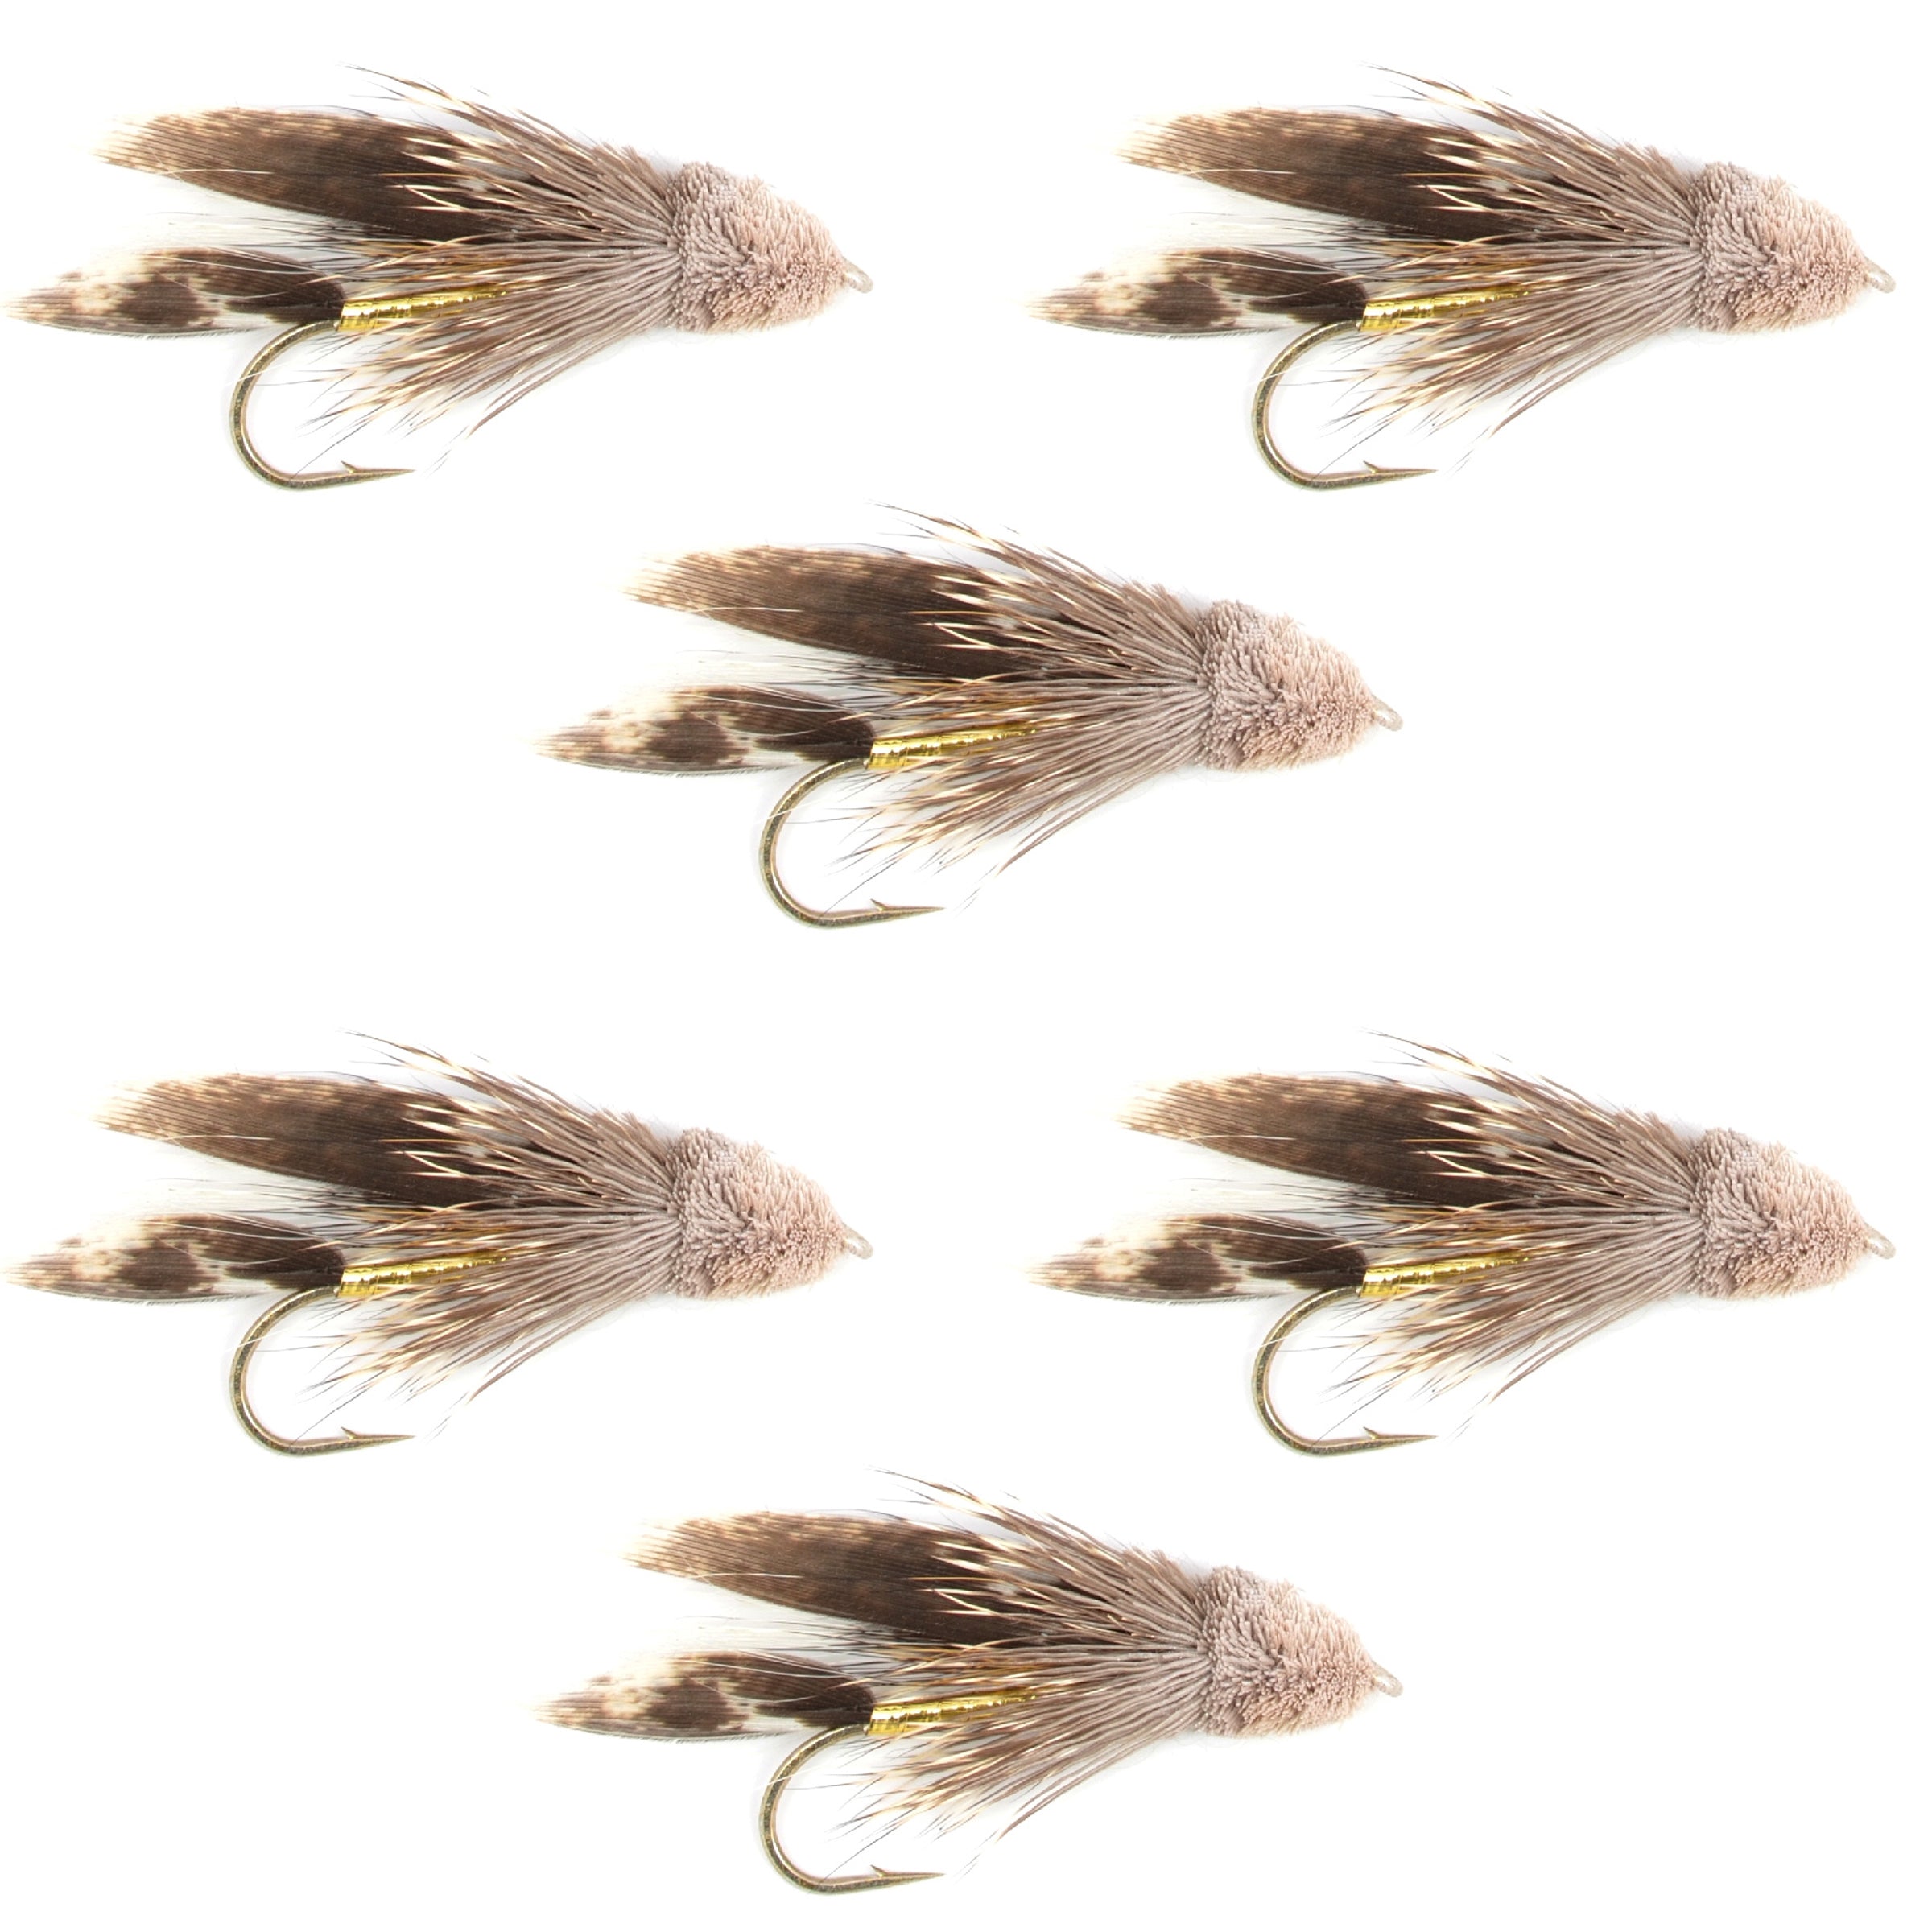 Muddler Minnow Fly Fishing Flies - Classic Bass and Trout Streamers - Set of 6 Flies Hook Size 4